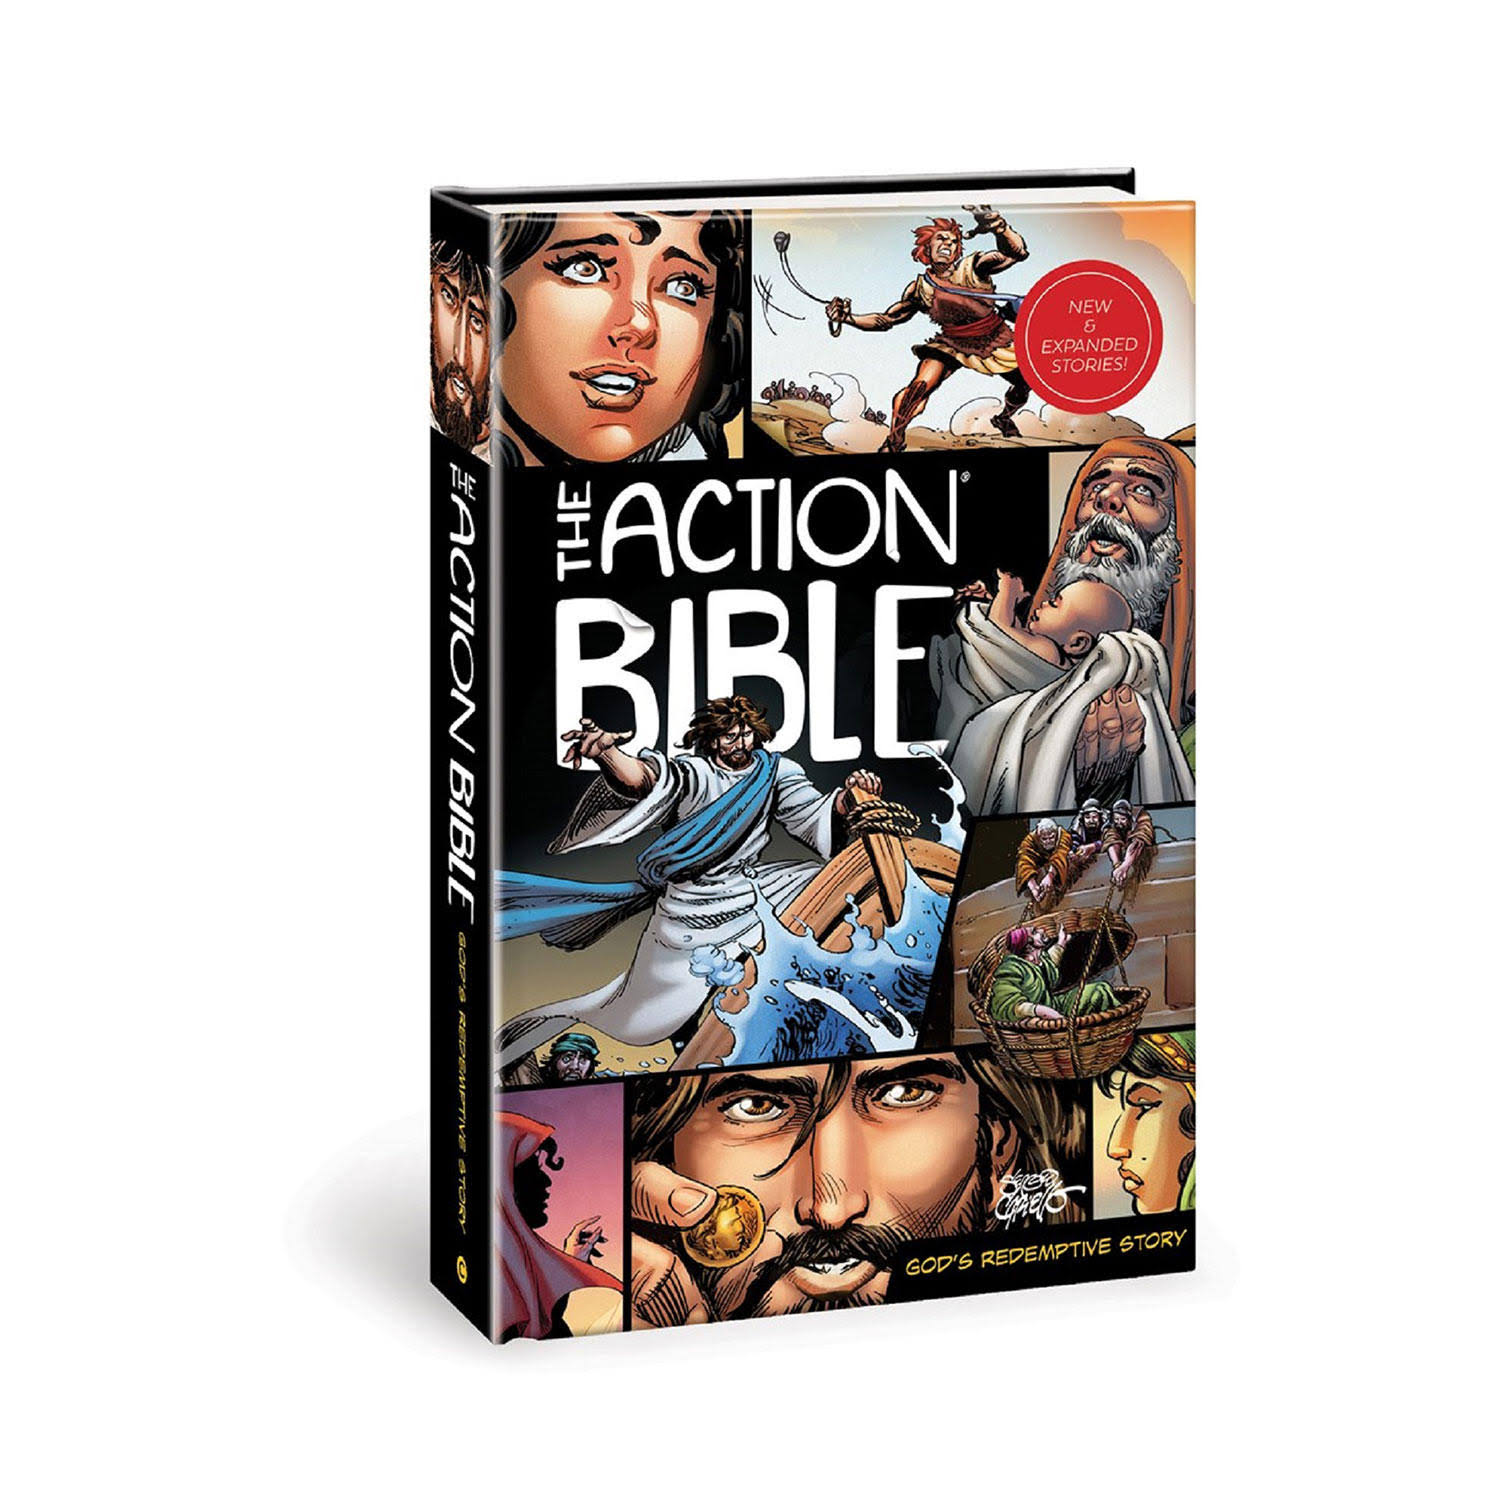 The Action Bible by Sergio Cariello